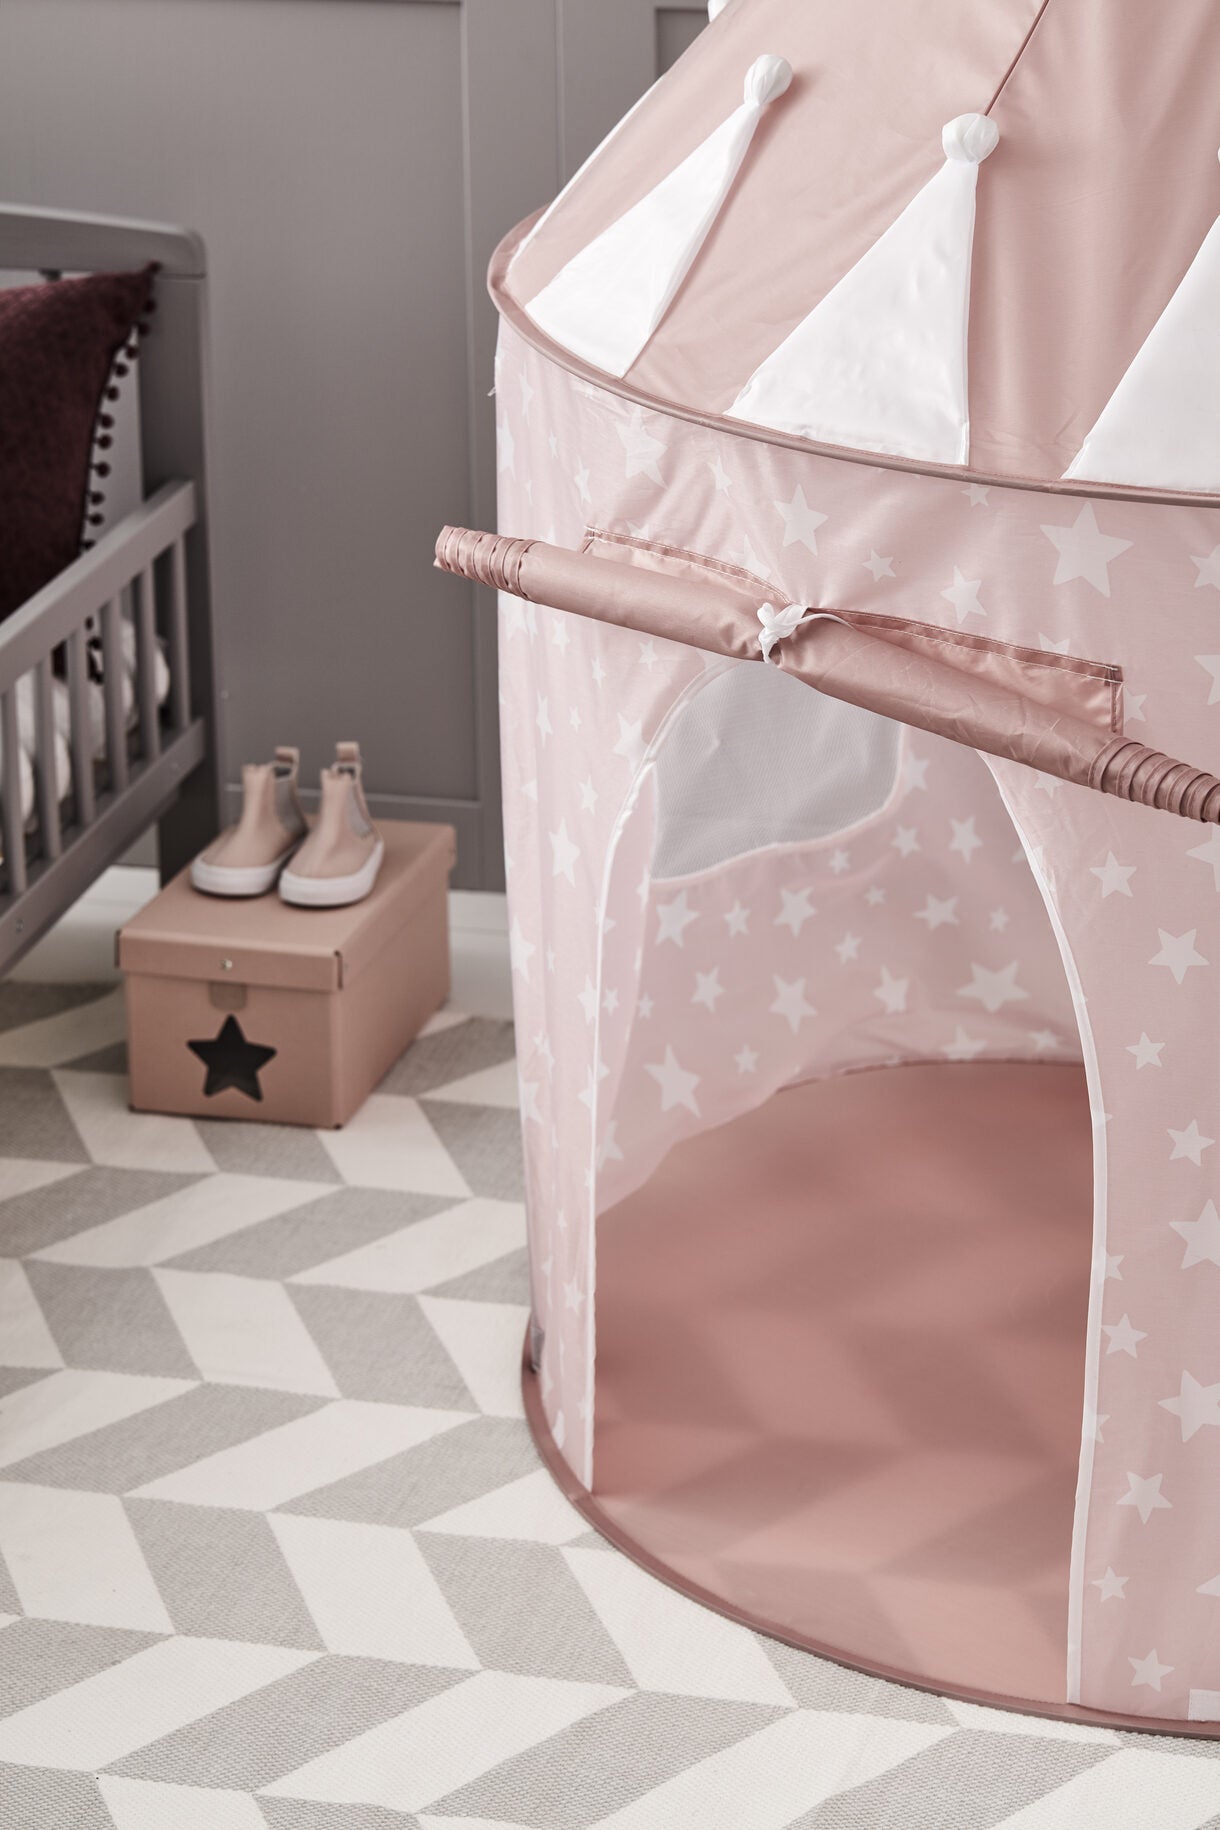 Kids Concept Play Tent Pink Star